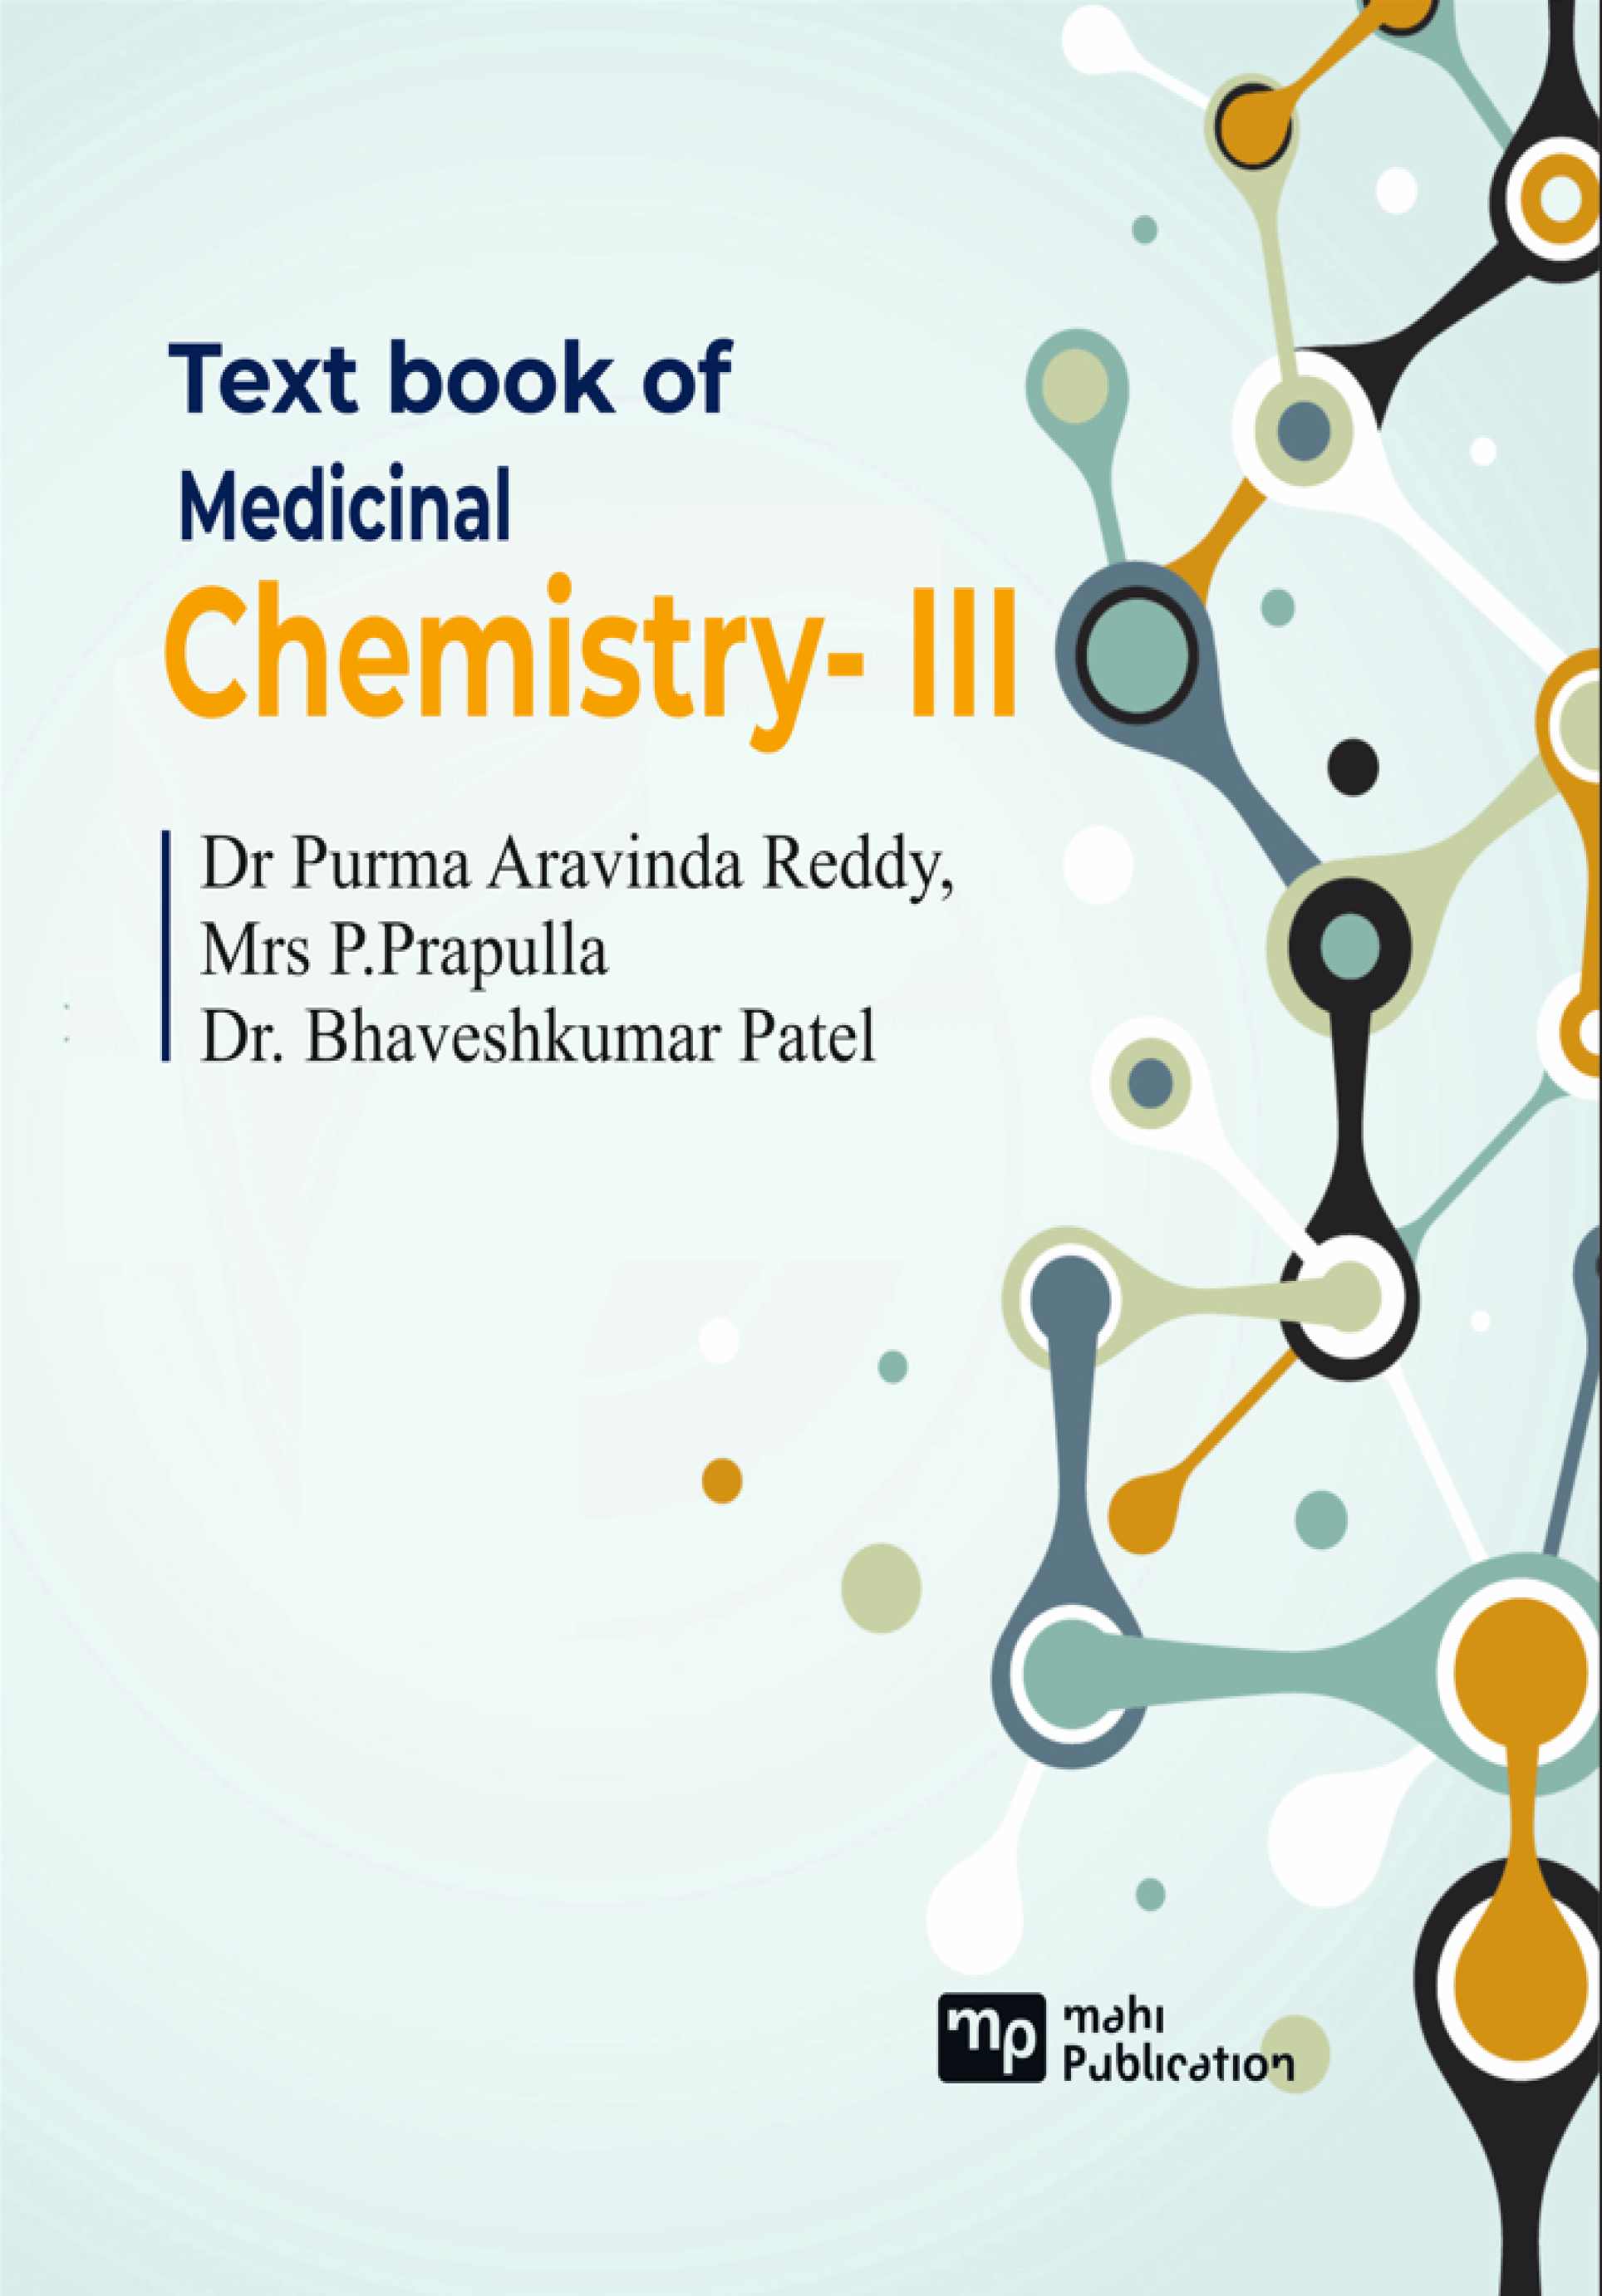 Text book of Medicinal Chemistry- III